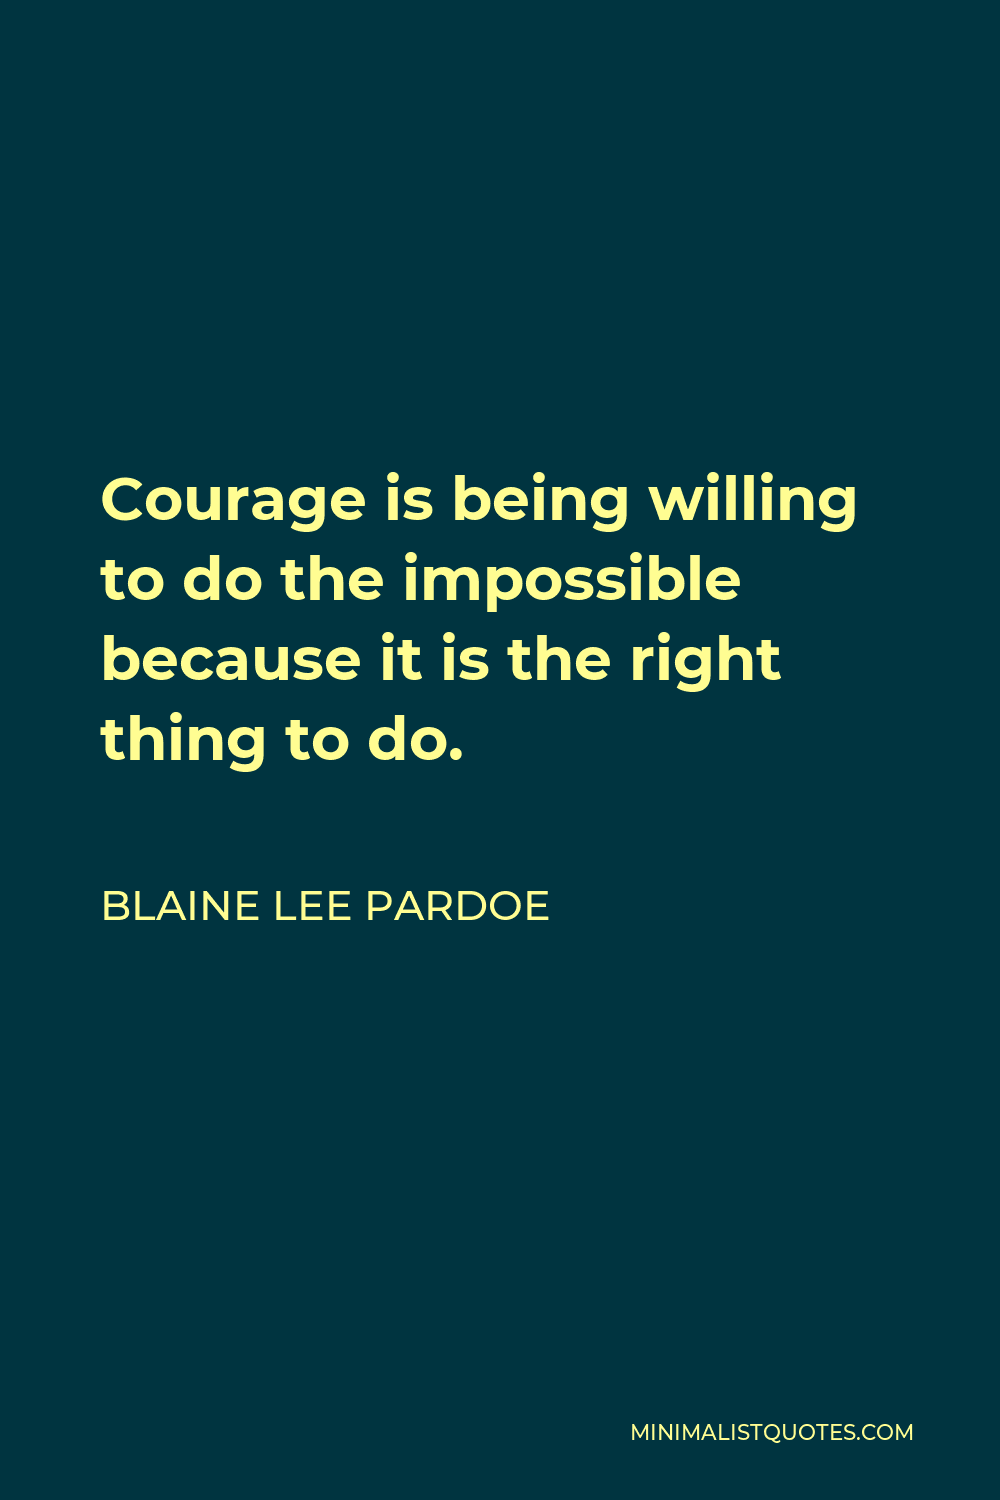 Blaine Lee Pardoe Quote - Courage is being willing to do the impossible because it is the right thing to do.